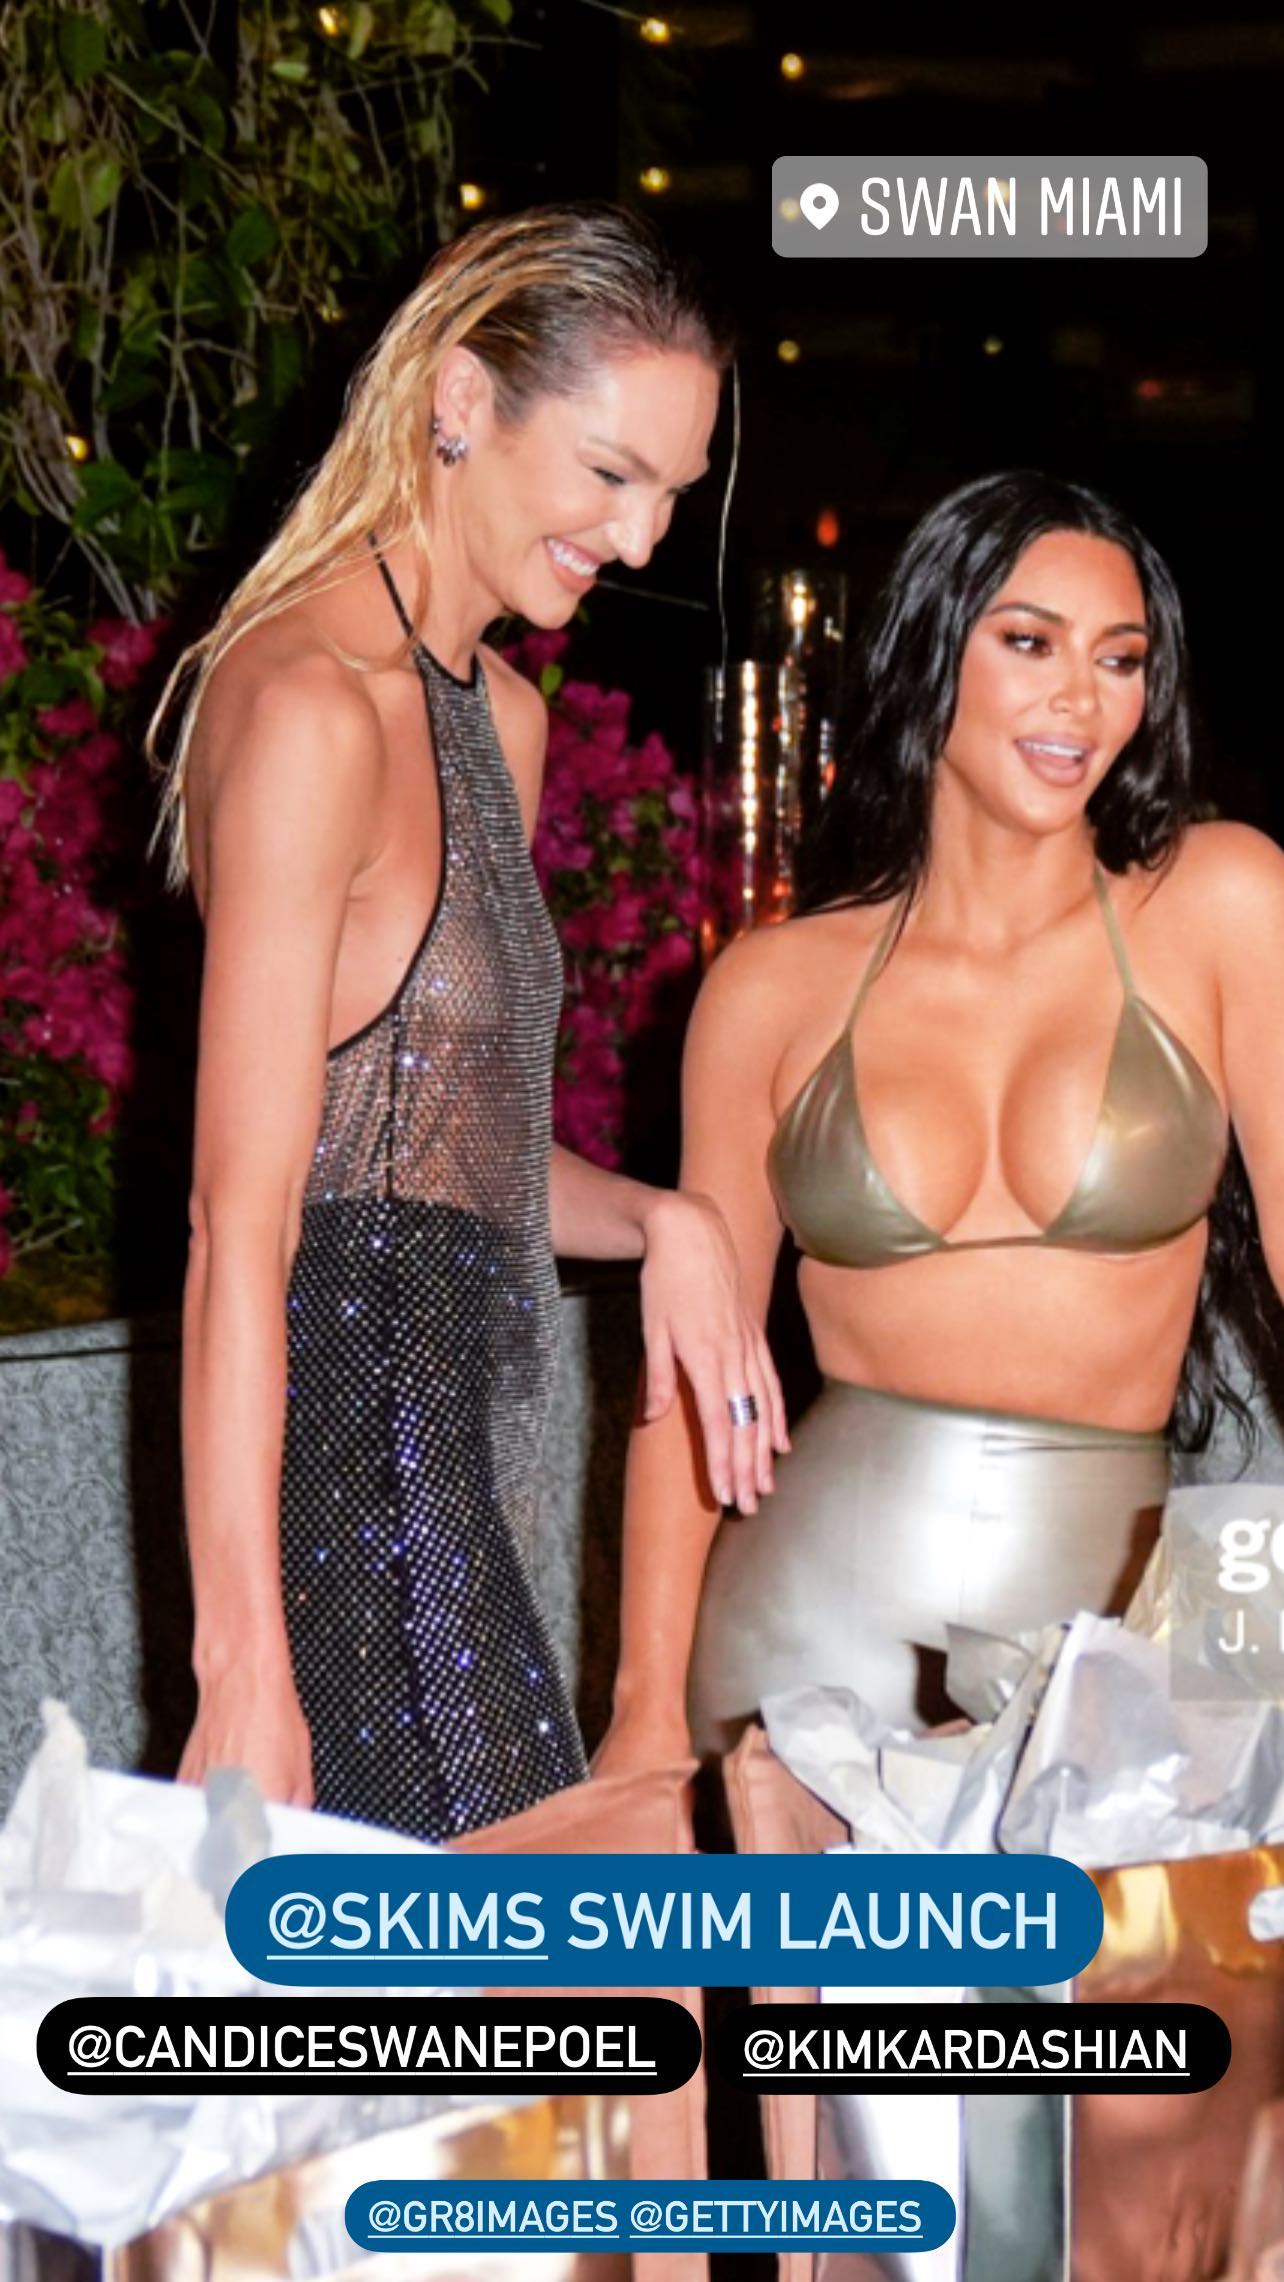 DivineCandice.Com on X: Candice Swanepoel and Kim Kardashian at the SKIMS  swim launch party in Swan Miami.  / X